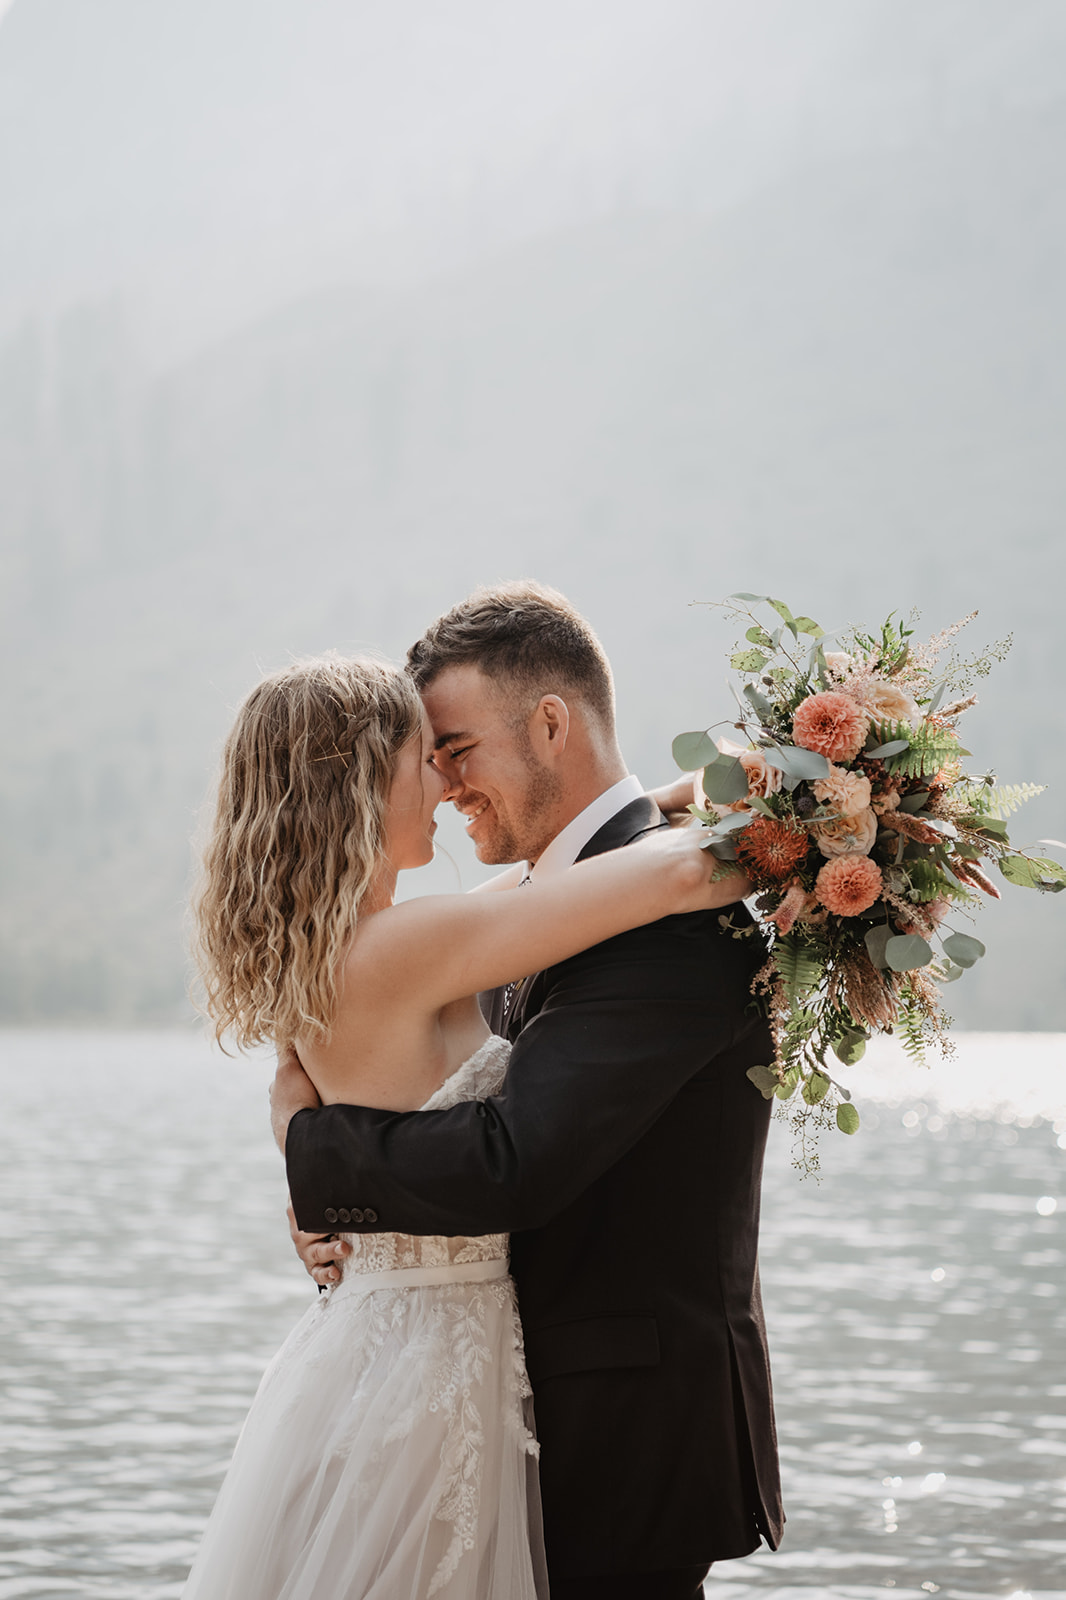 bride and groomin the Grand Tetons planning to elope as they stand at a lake embracing each toher and looking deeply into one another's eyes while the bride holds her pink and cream wedding bouquet over the groom shoudlers